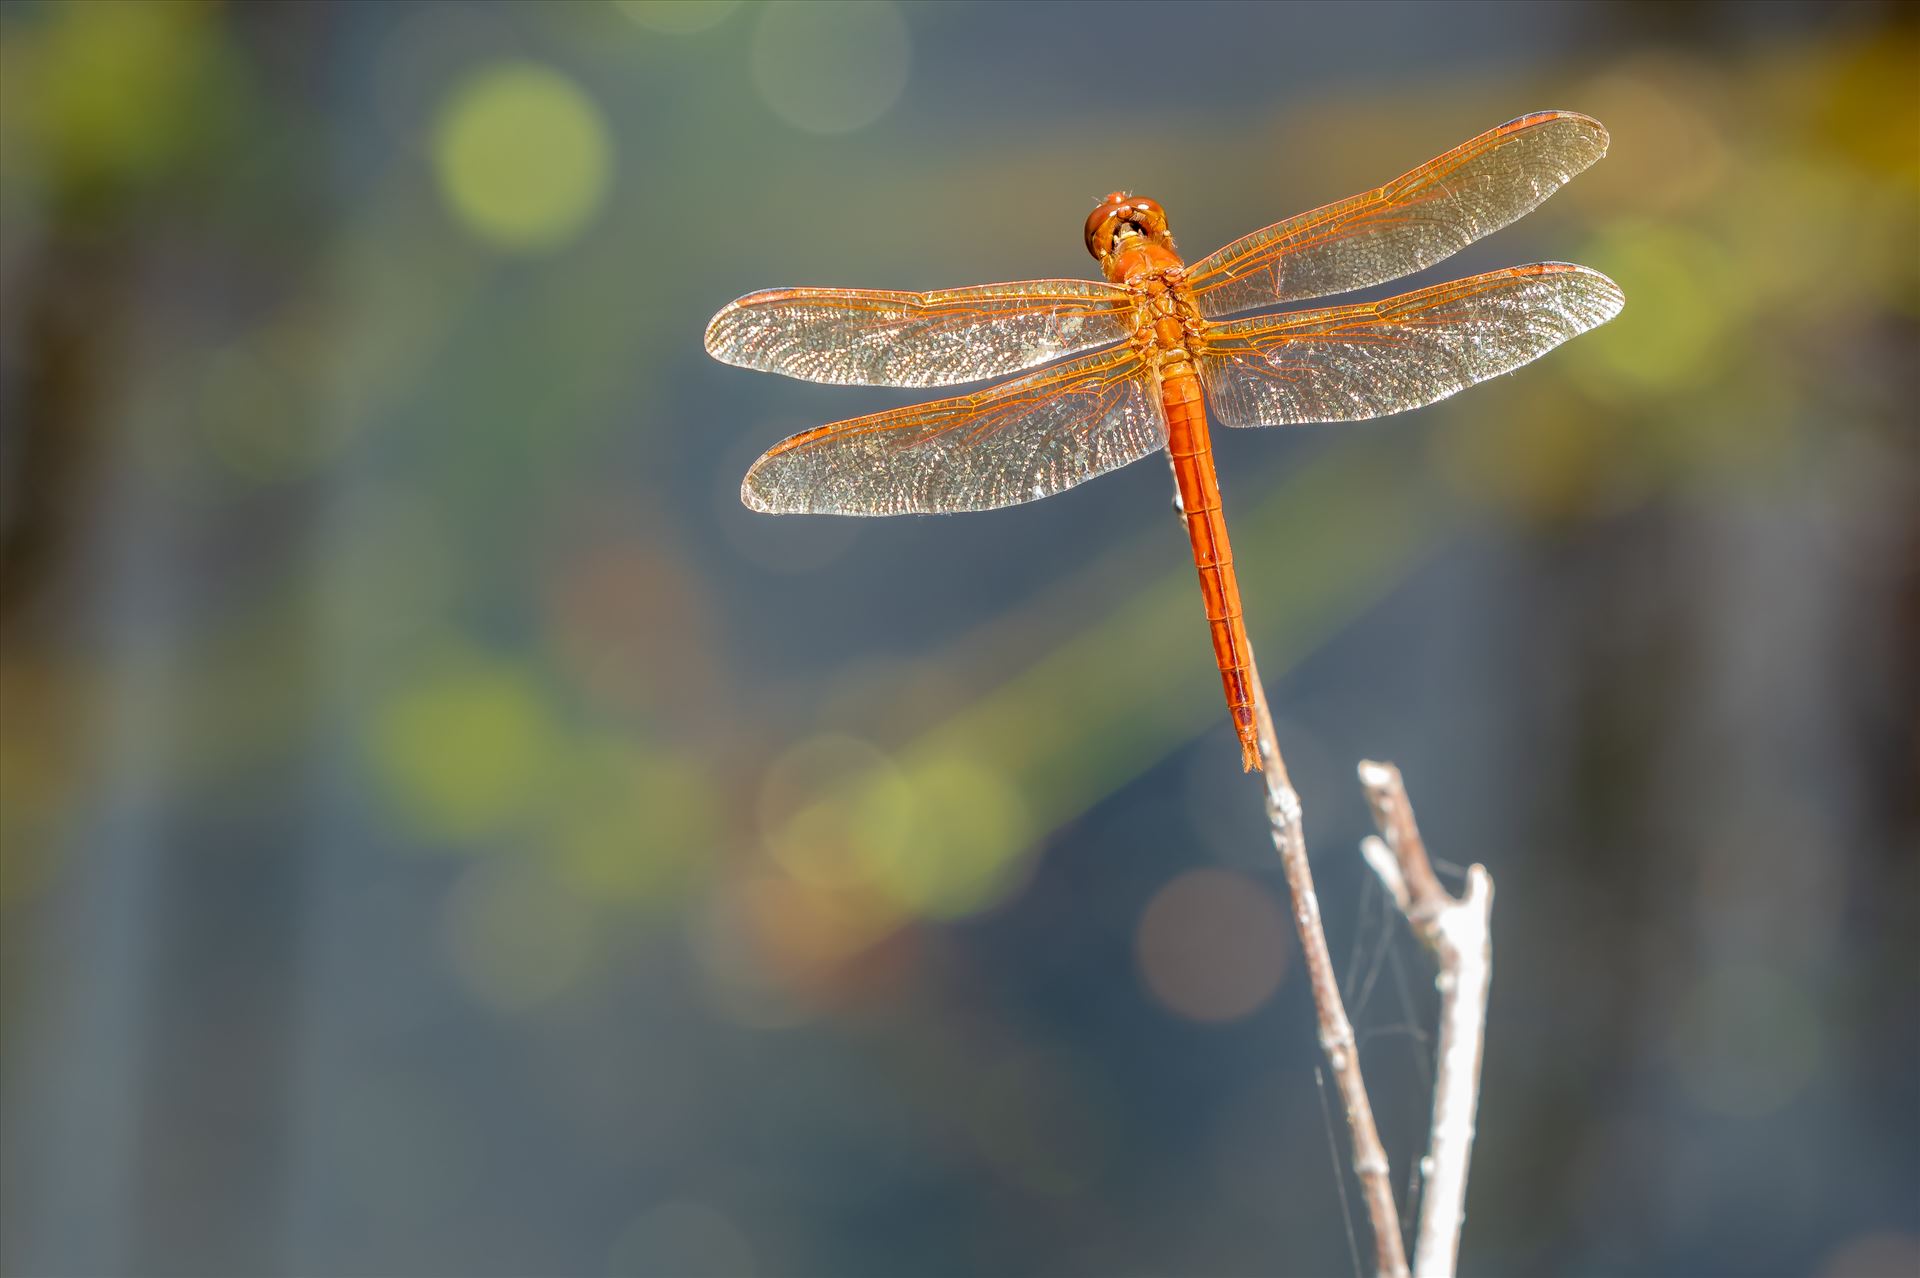 reddish or rust color dragonfly at st andrews state park sf-8502092.jpg reddish/rust color dragonfly on end of twig at St. Andrews State Park, Panama City, Florida by Terry Kelly Photography